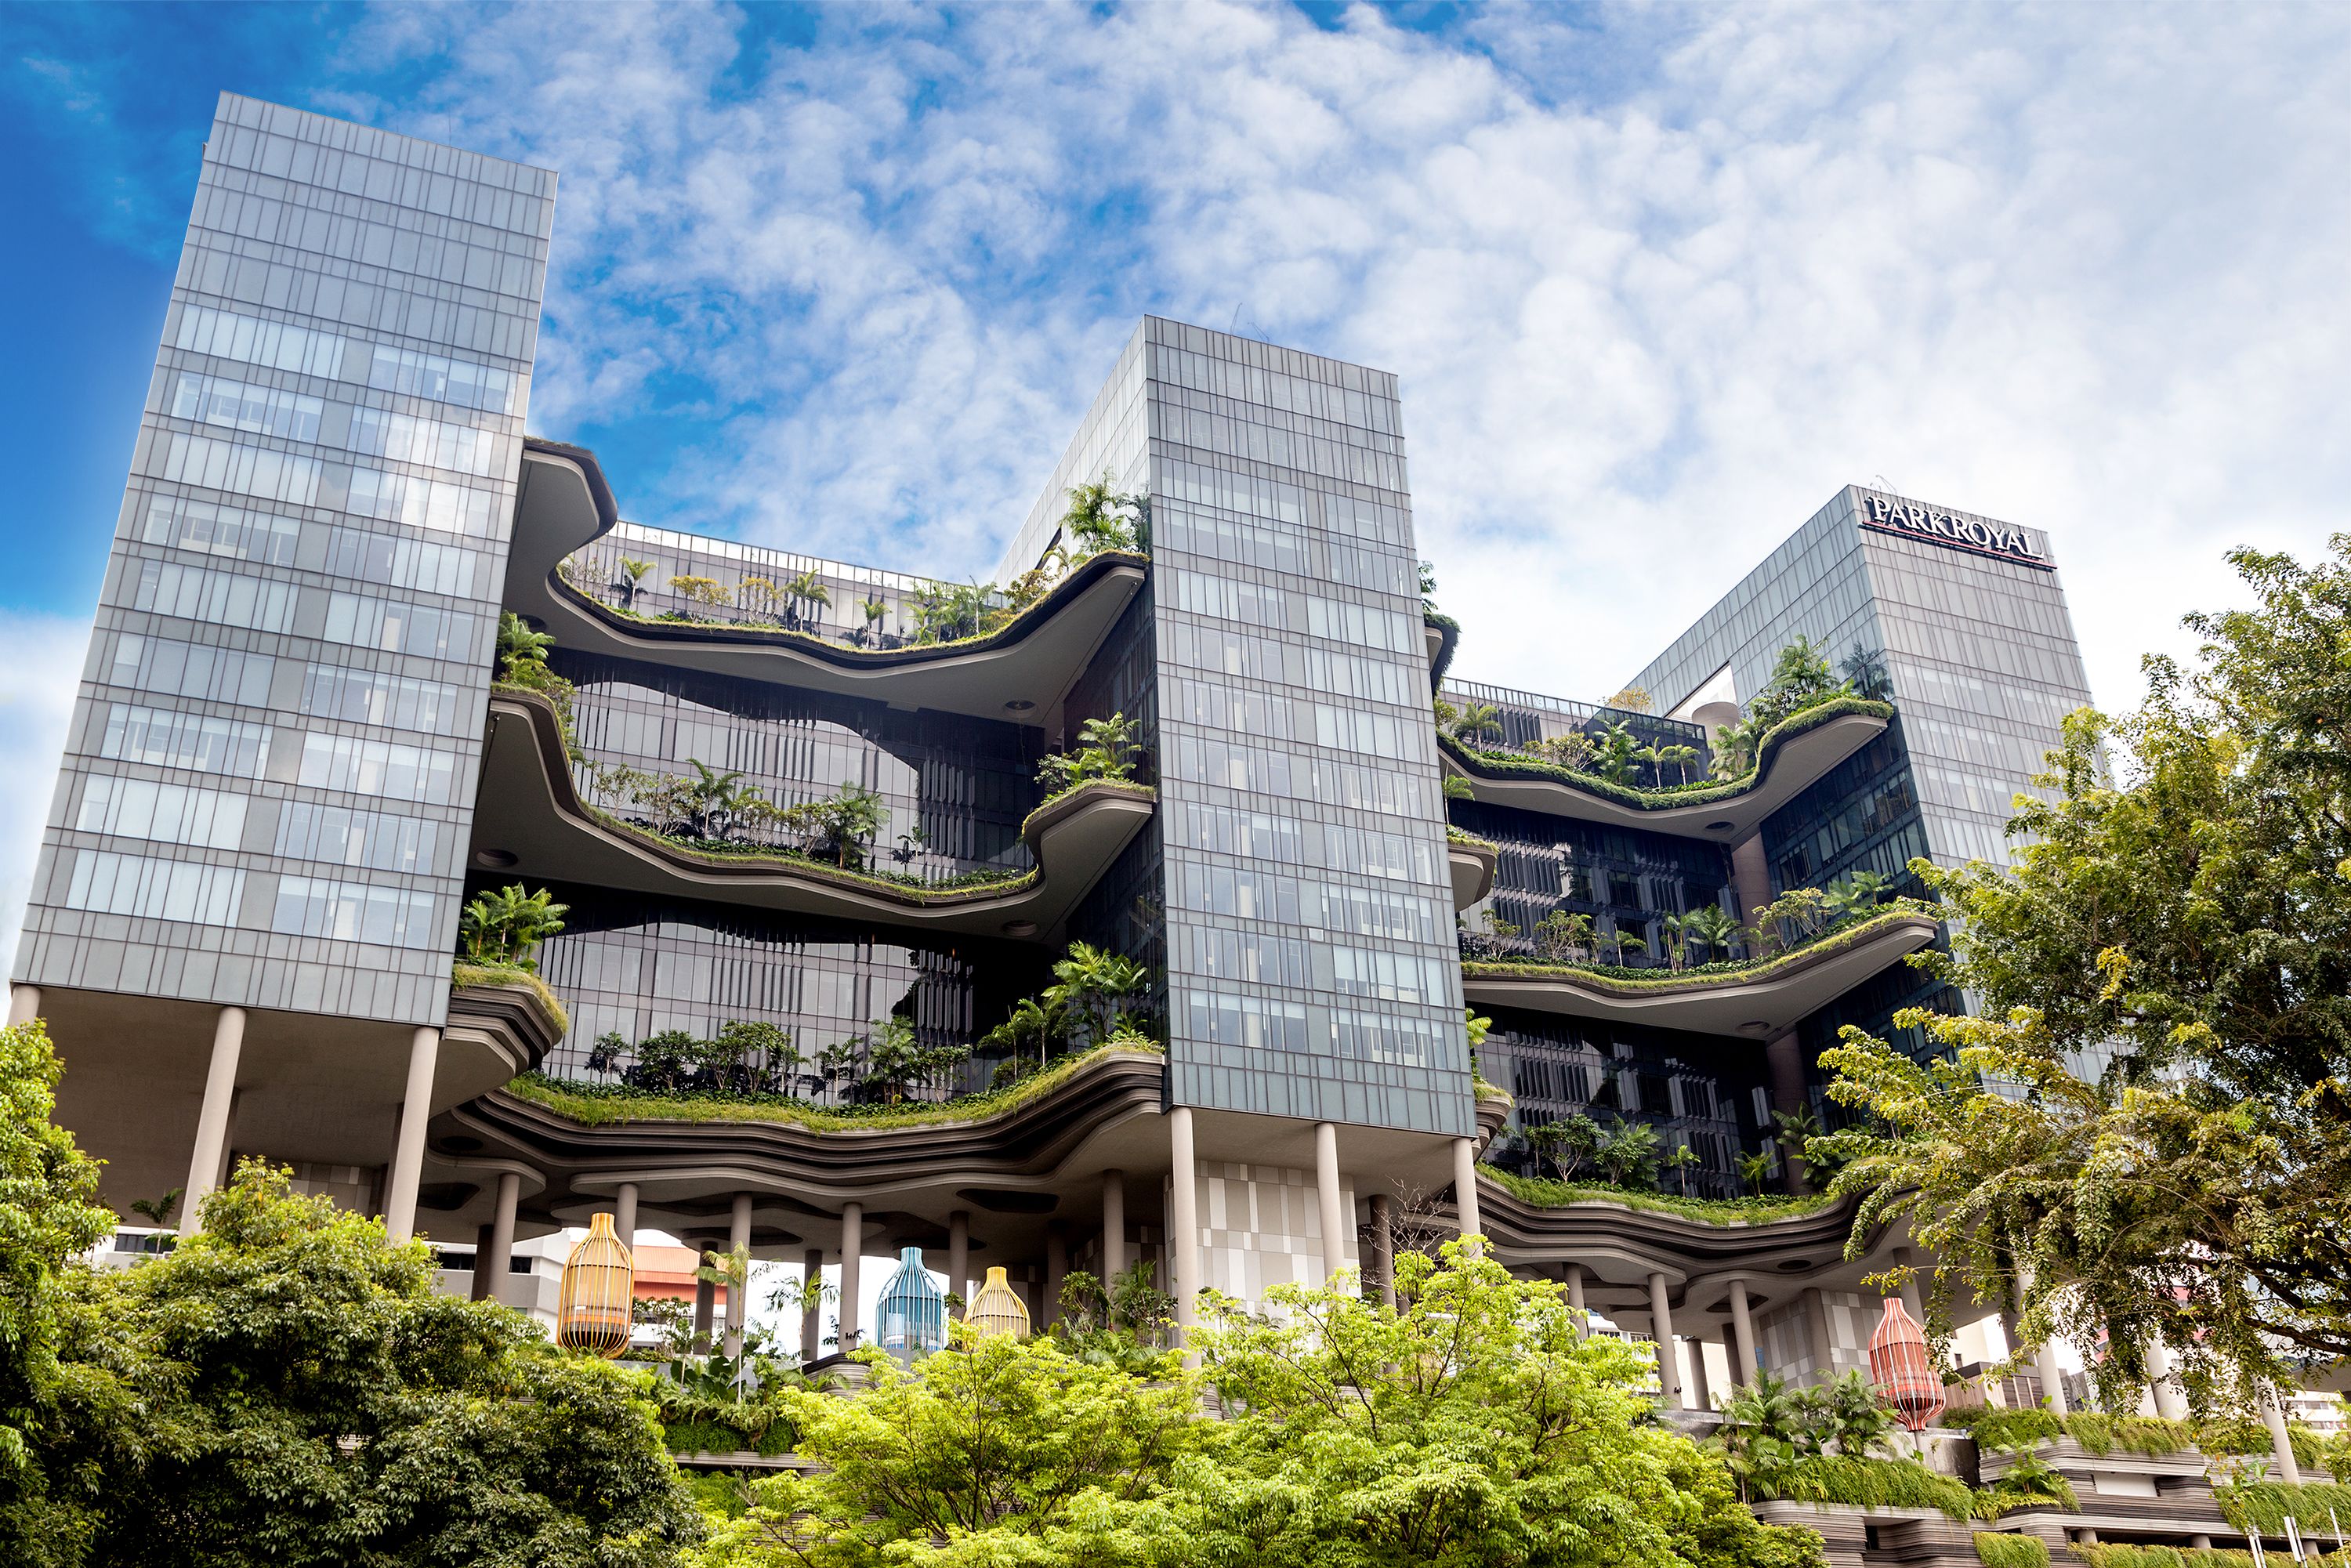 Townships that are more than just green buildings